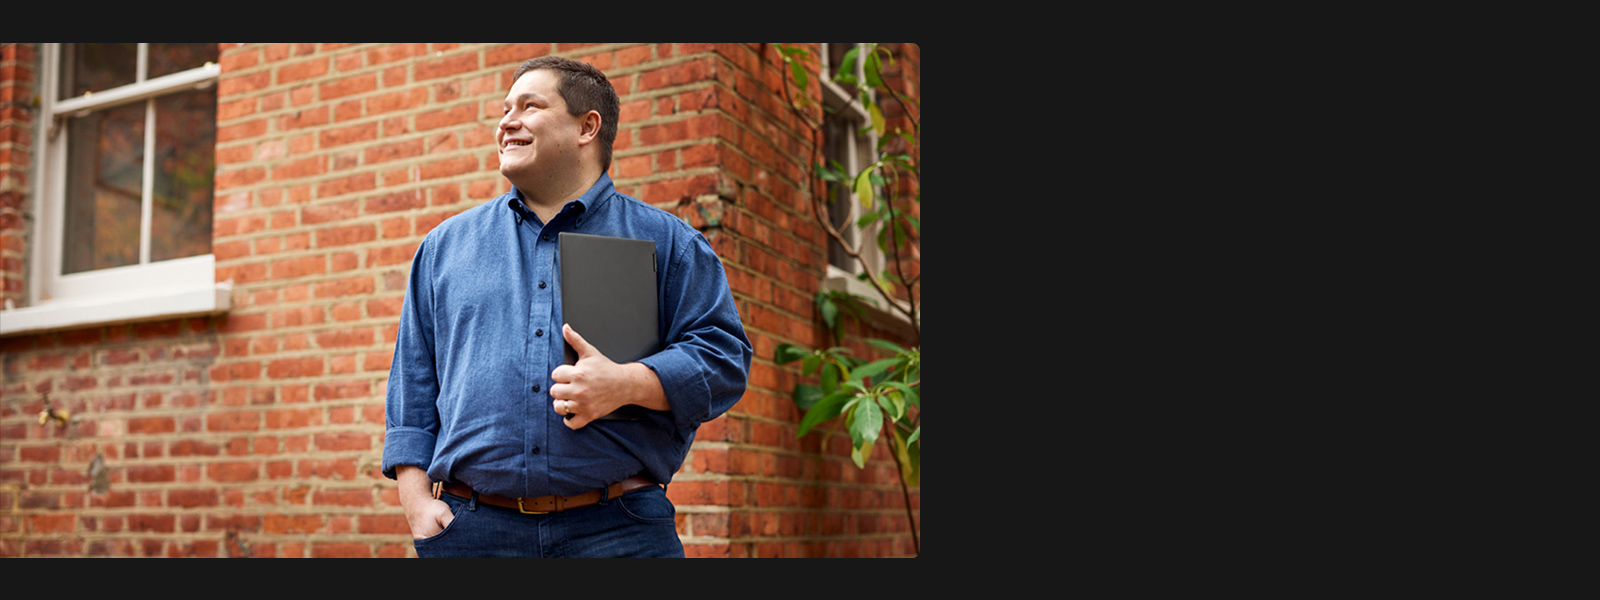 A man standing outside holding a laptop